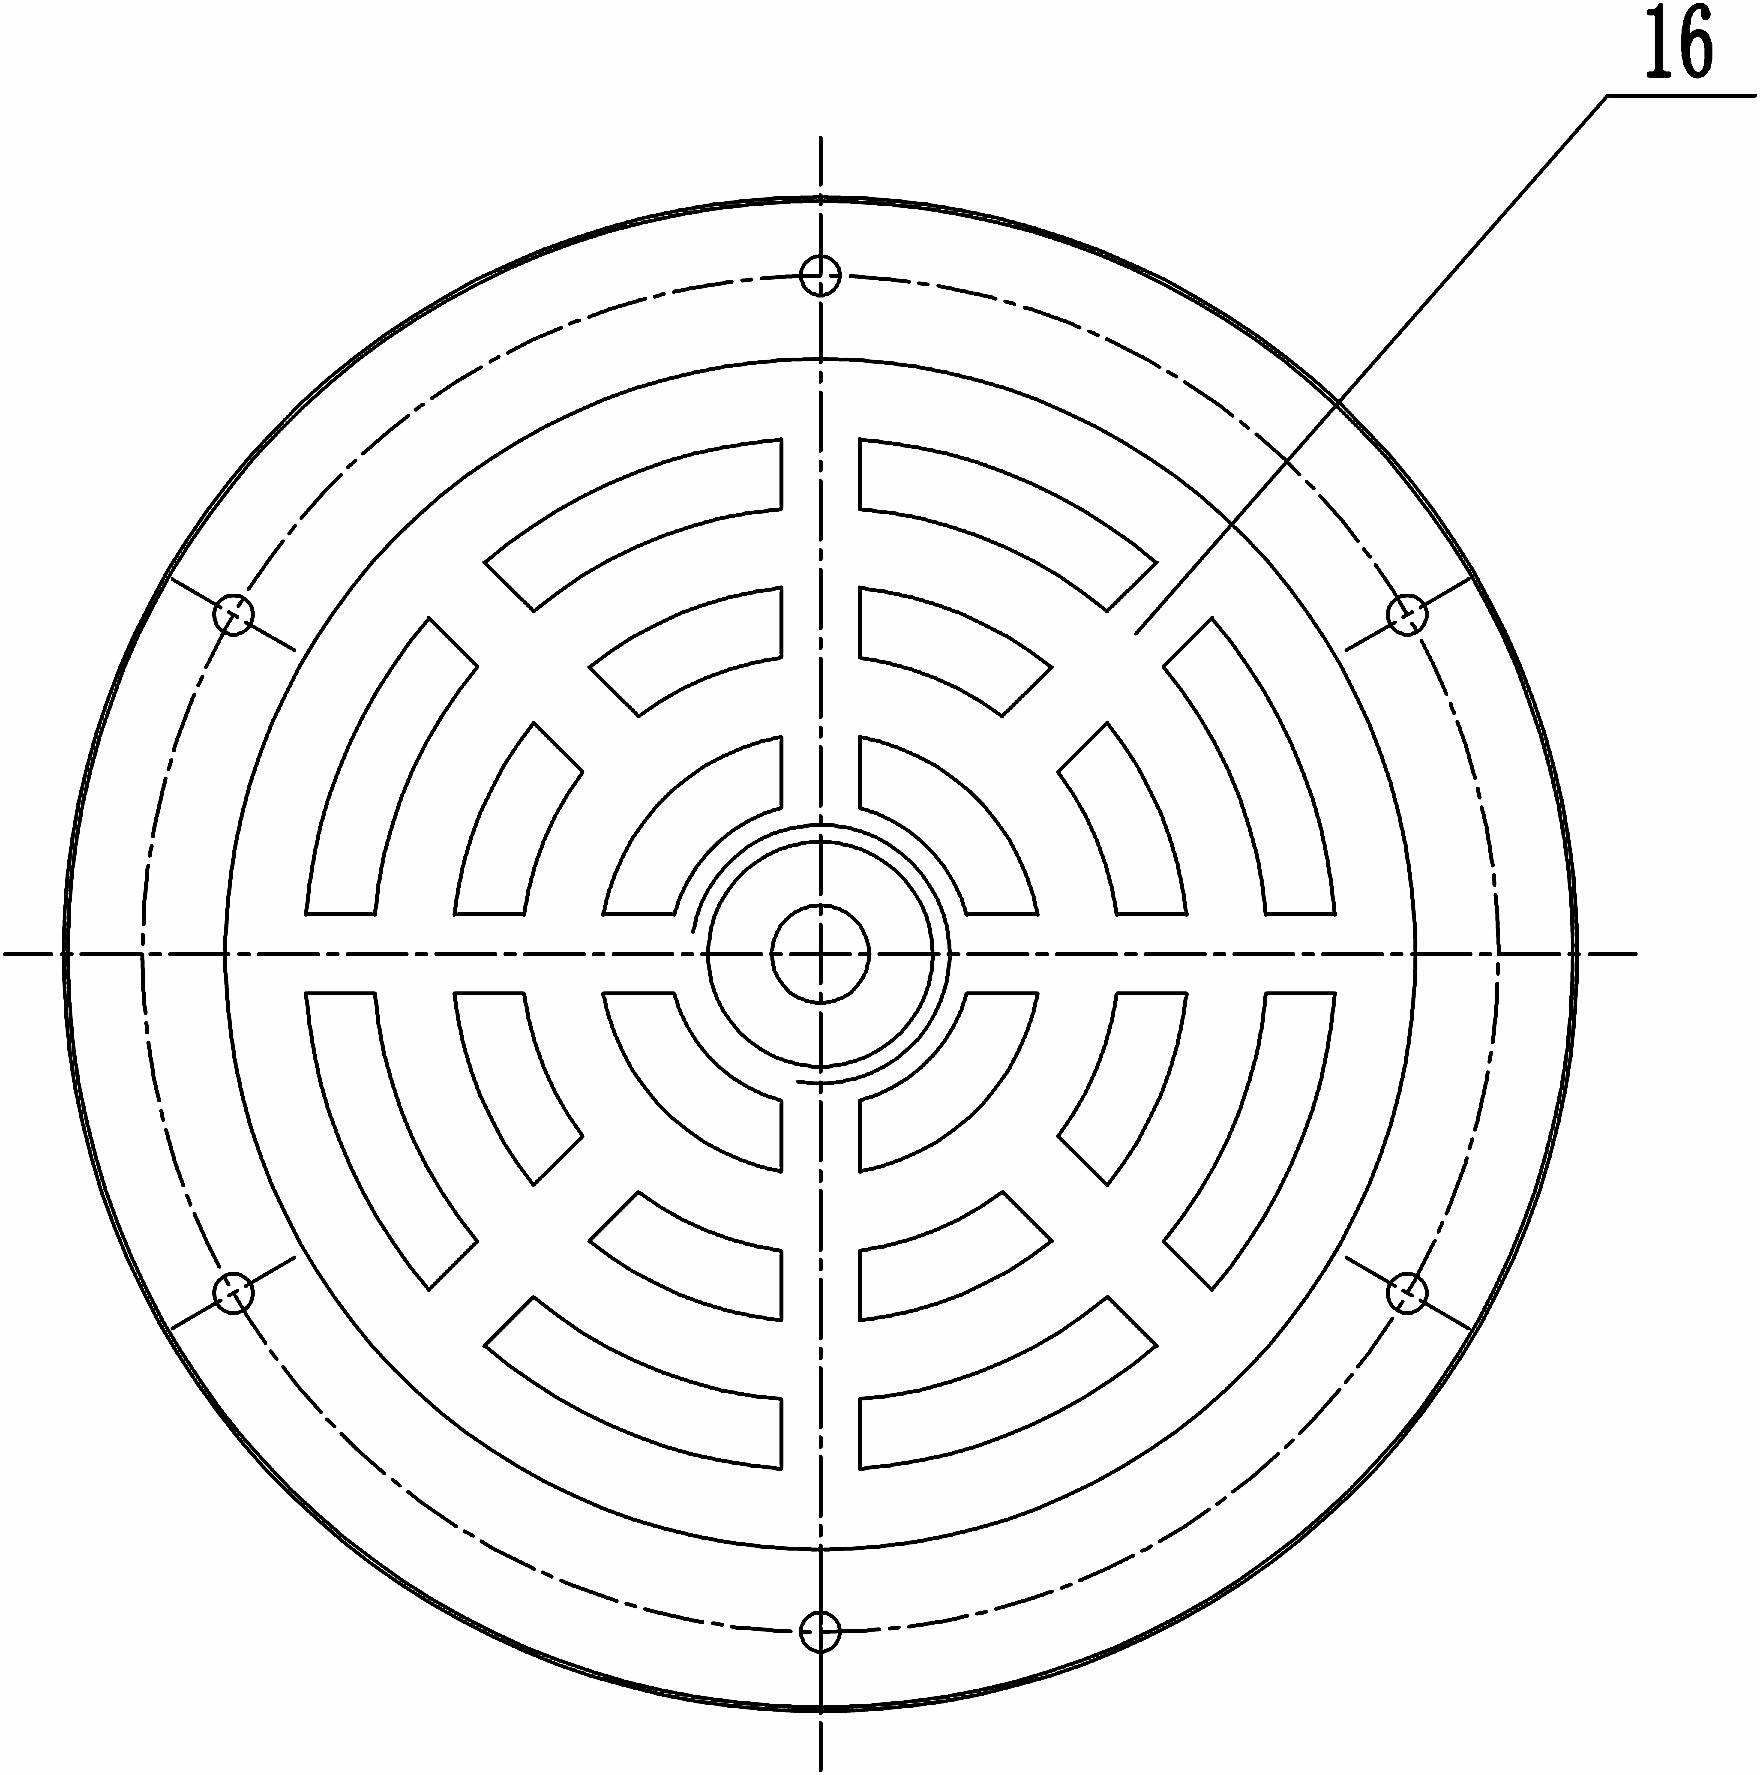 Experimental device and method for simulating working conditions of filter press